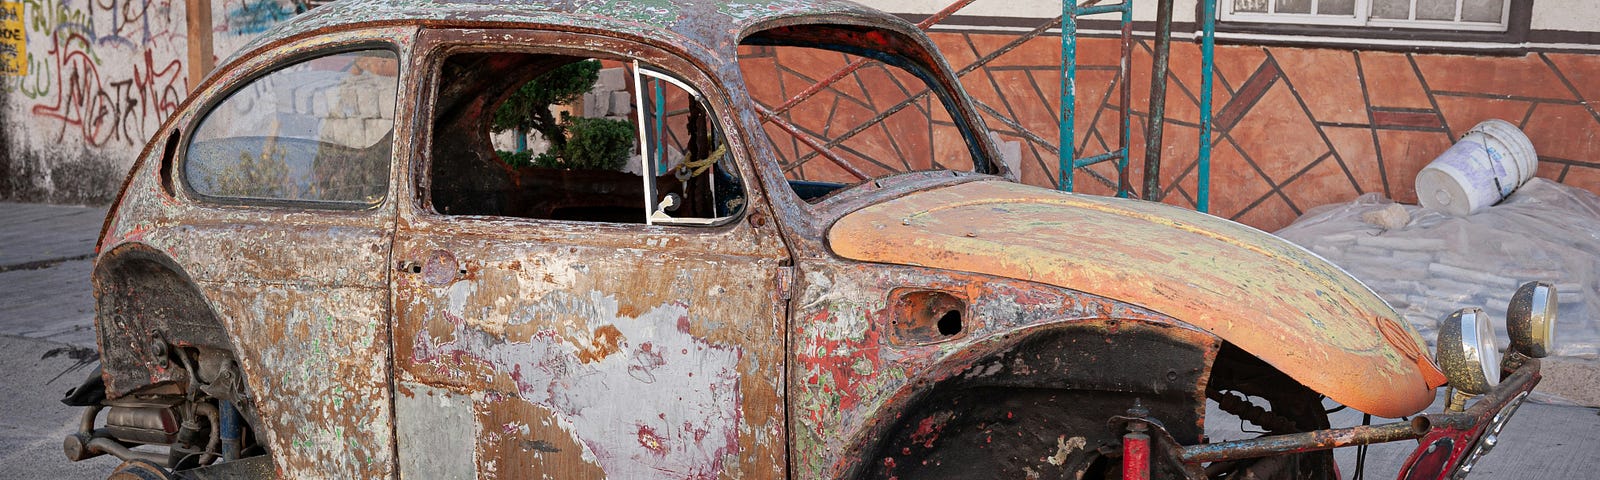 An old, rusty VW bug sits up on blocks. It’s in rough shape.